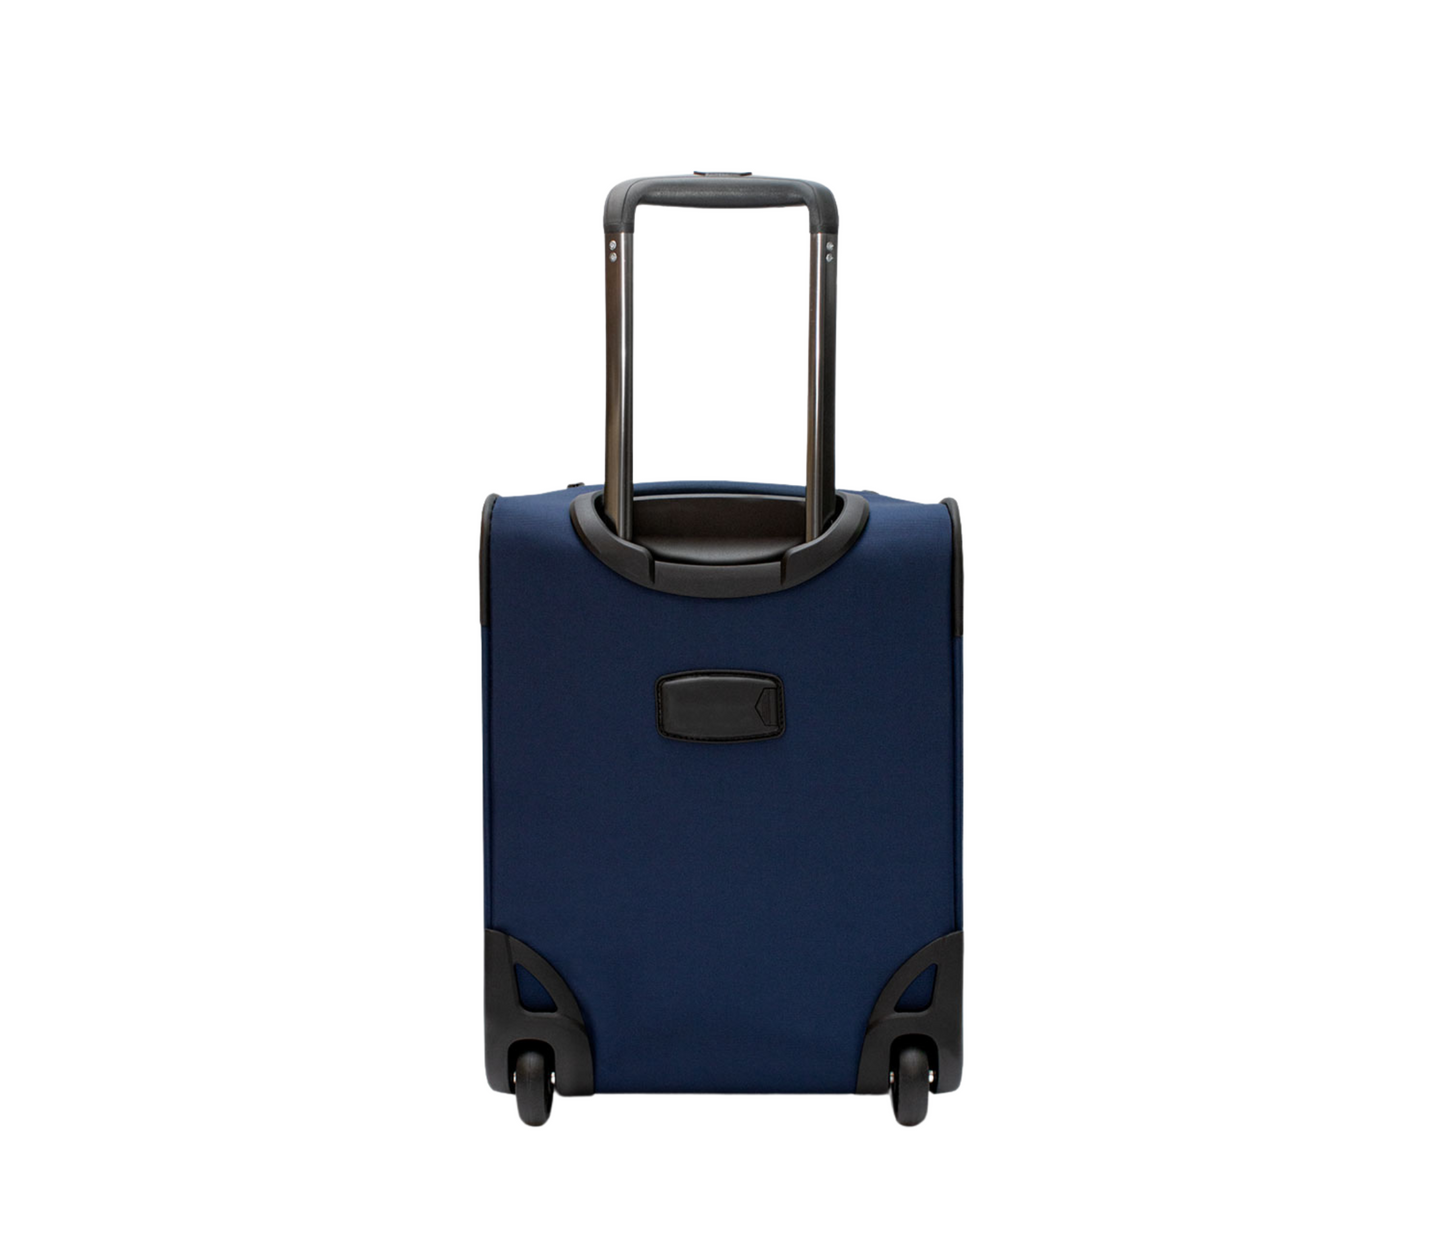 Cavalinho Carry-on Softside Cabin Luggage (16" or 19") - 16 inch SteelBlue - 68020003.03.16_P03